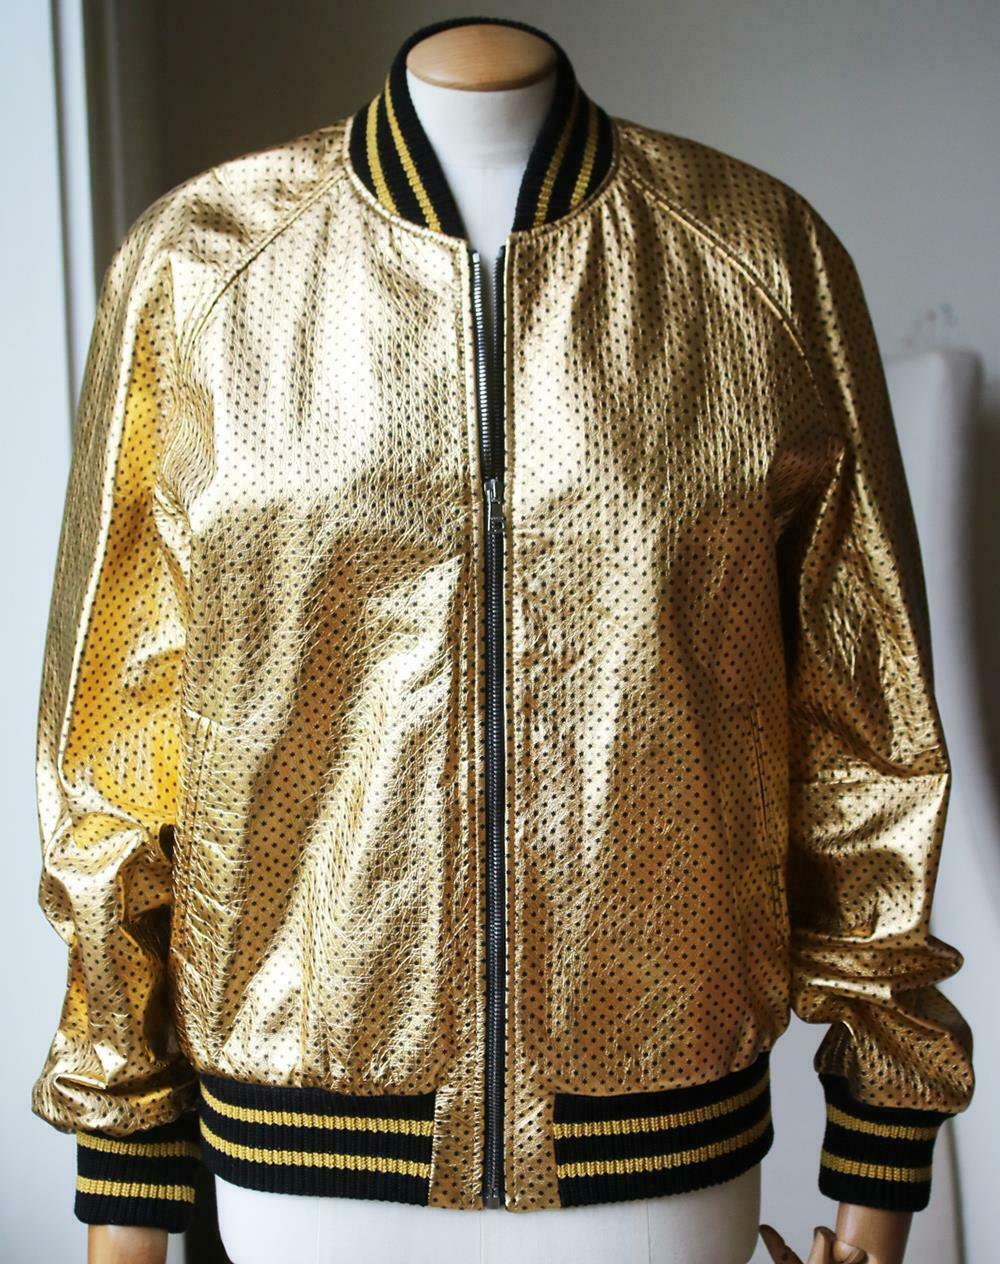 Gold leather with black stars and Guccy in SEGA font. Knit trim. Front pockets.
Zip closure. Cotton lining. Made in Italy. Colour: gold. 100% Lambskin leather.

Size: IT 44 (UK 12, US 8, FR 40)

Condition: As new condition, no sign of wear. 